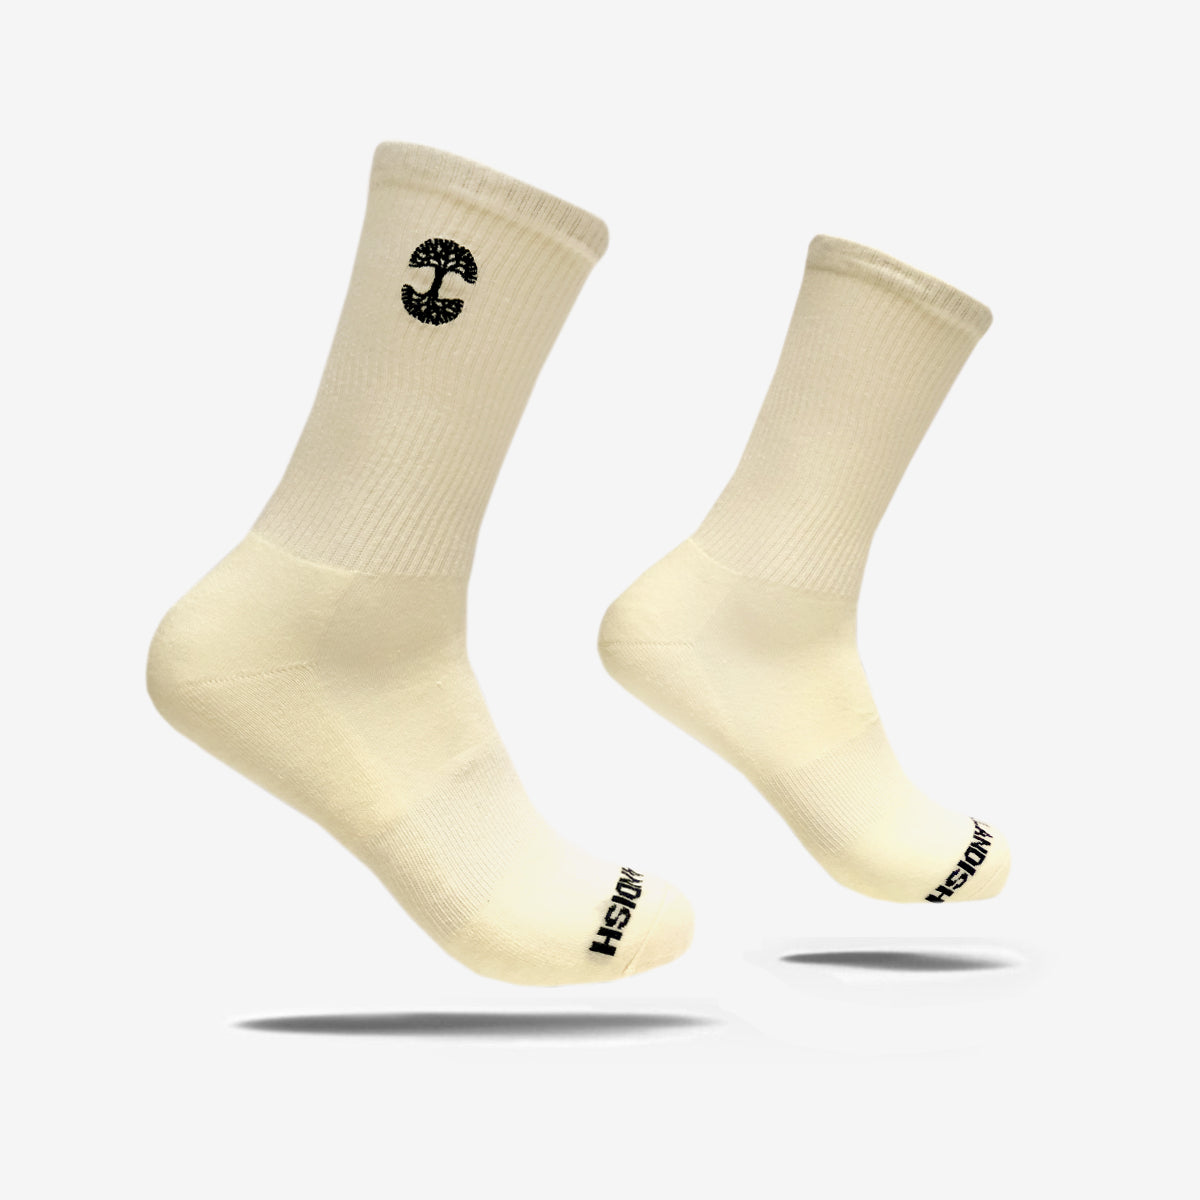 High-cut men's cream crew socks with black embroidered Oaklandish logo at the top & Oaklandish wordmark on toes.